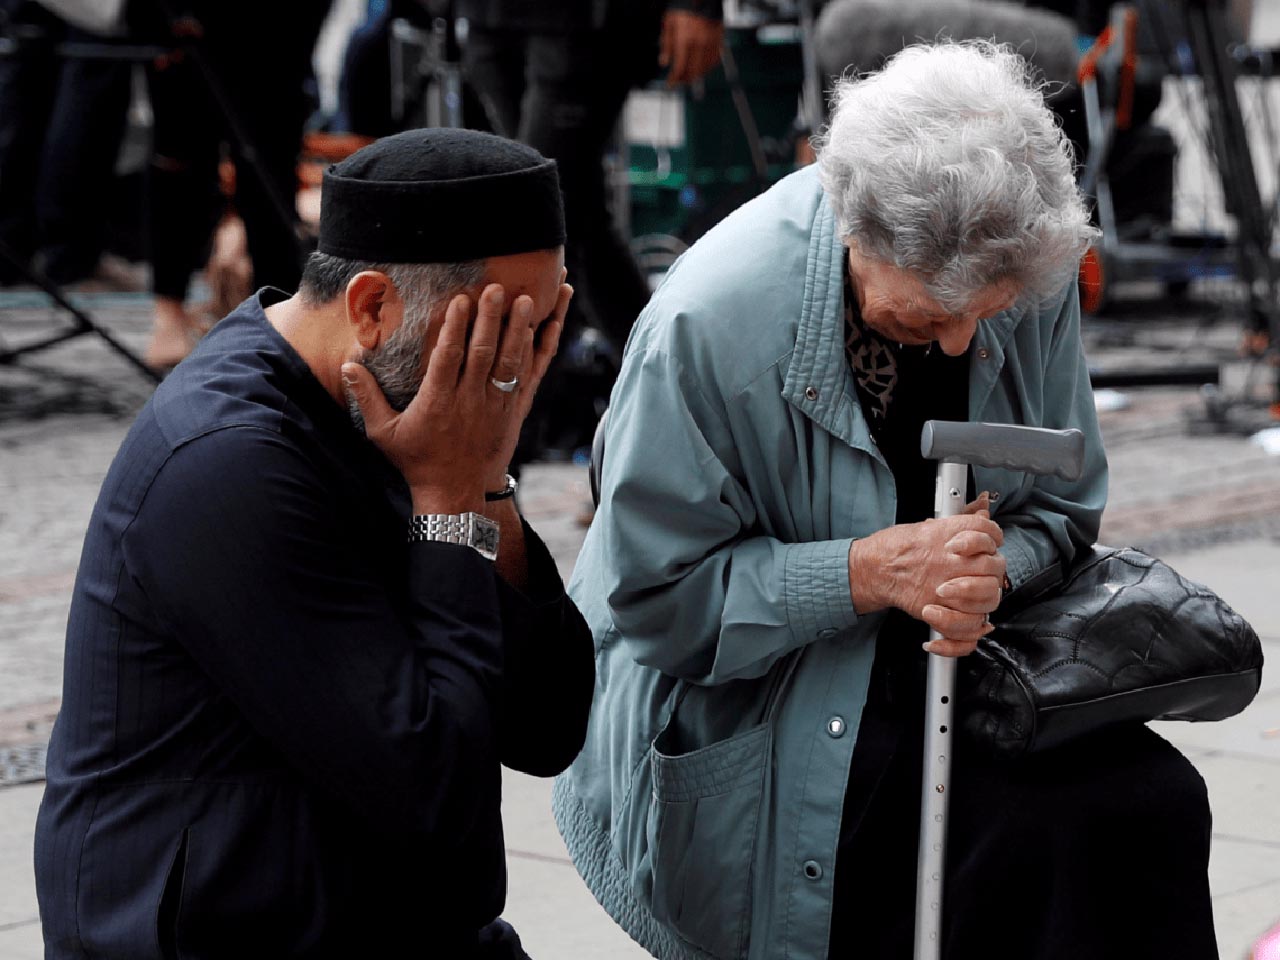 22 Photos From 2017 That Tell A Story: After Manchester bombing on May 22, 2017, Muslim Sadiq Pattel and Jewish Renee Rachel Black are crying together for the people who have died.